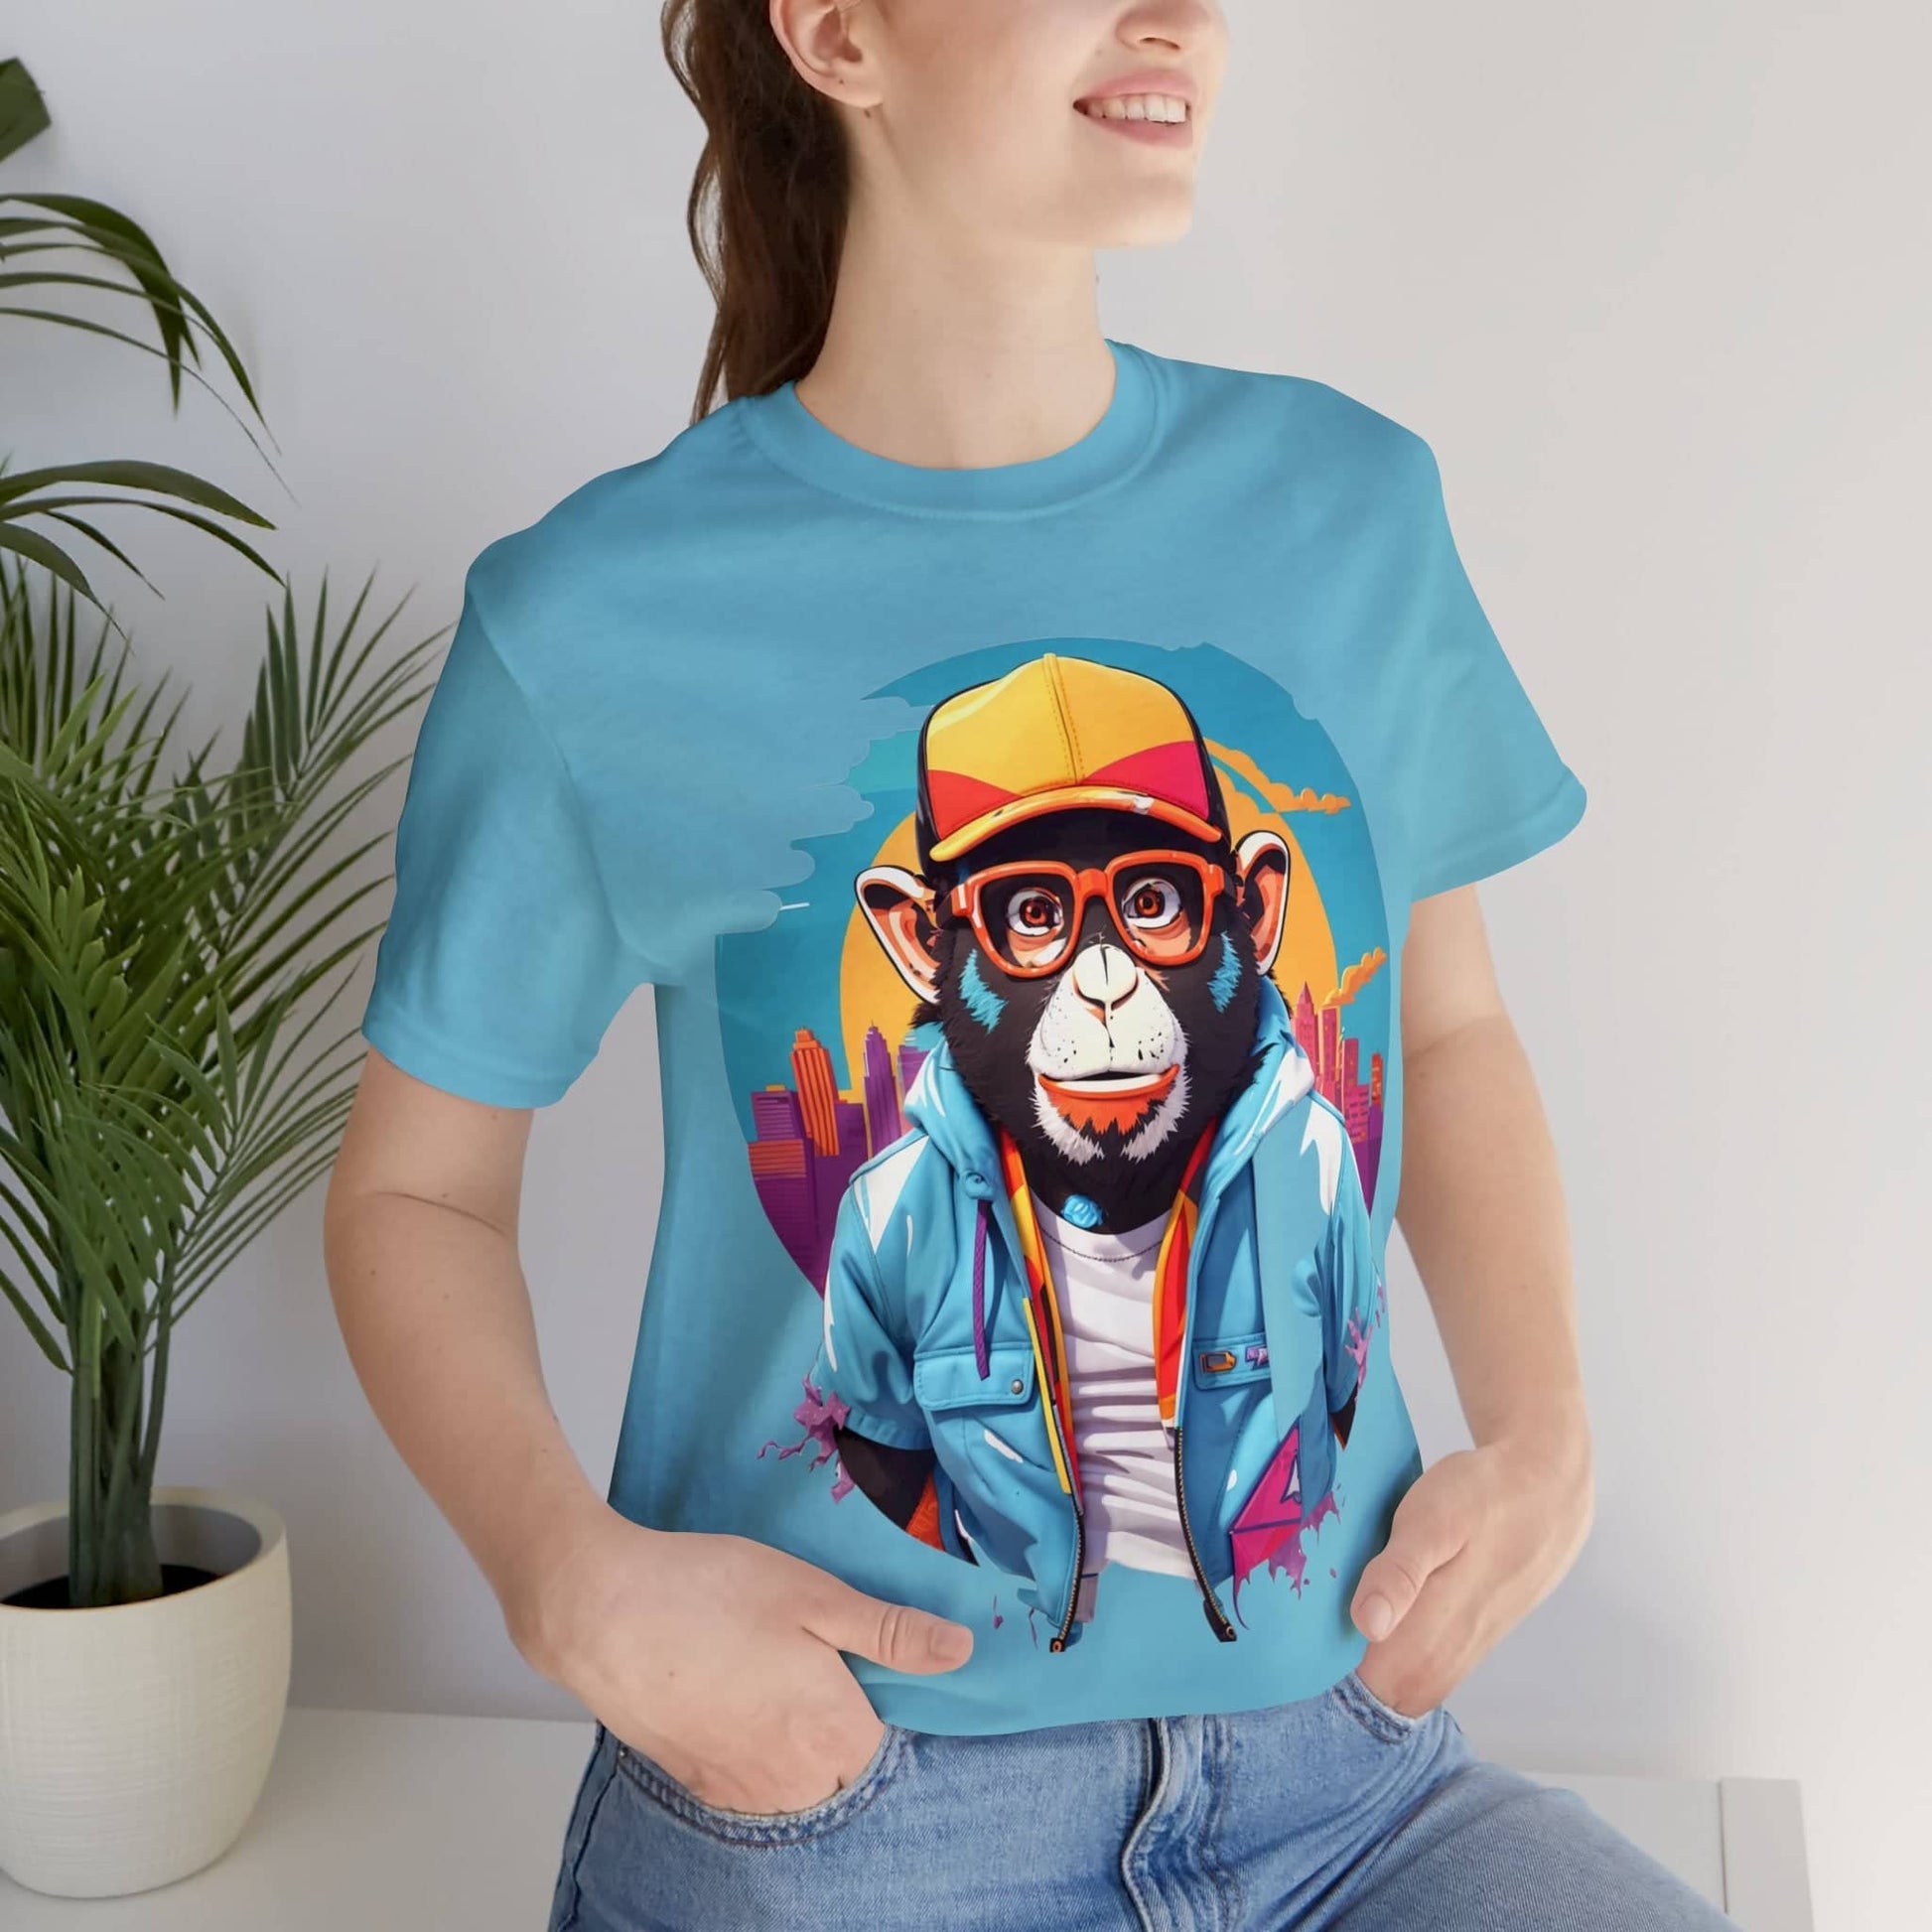 "Limited Edition Graffiti Gorilla: Urban Hip-Hop Graphic Tee for the Trendy Streetwear Connoisseur" T-Shirt Bigger Than Life Turquoise M 